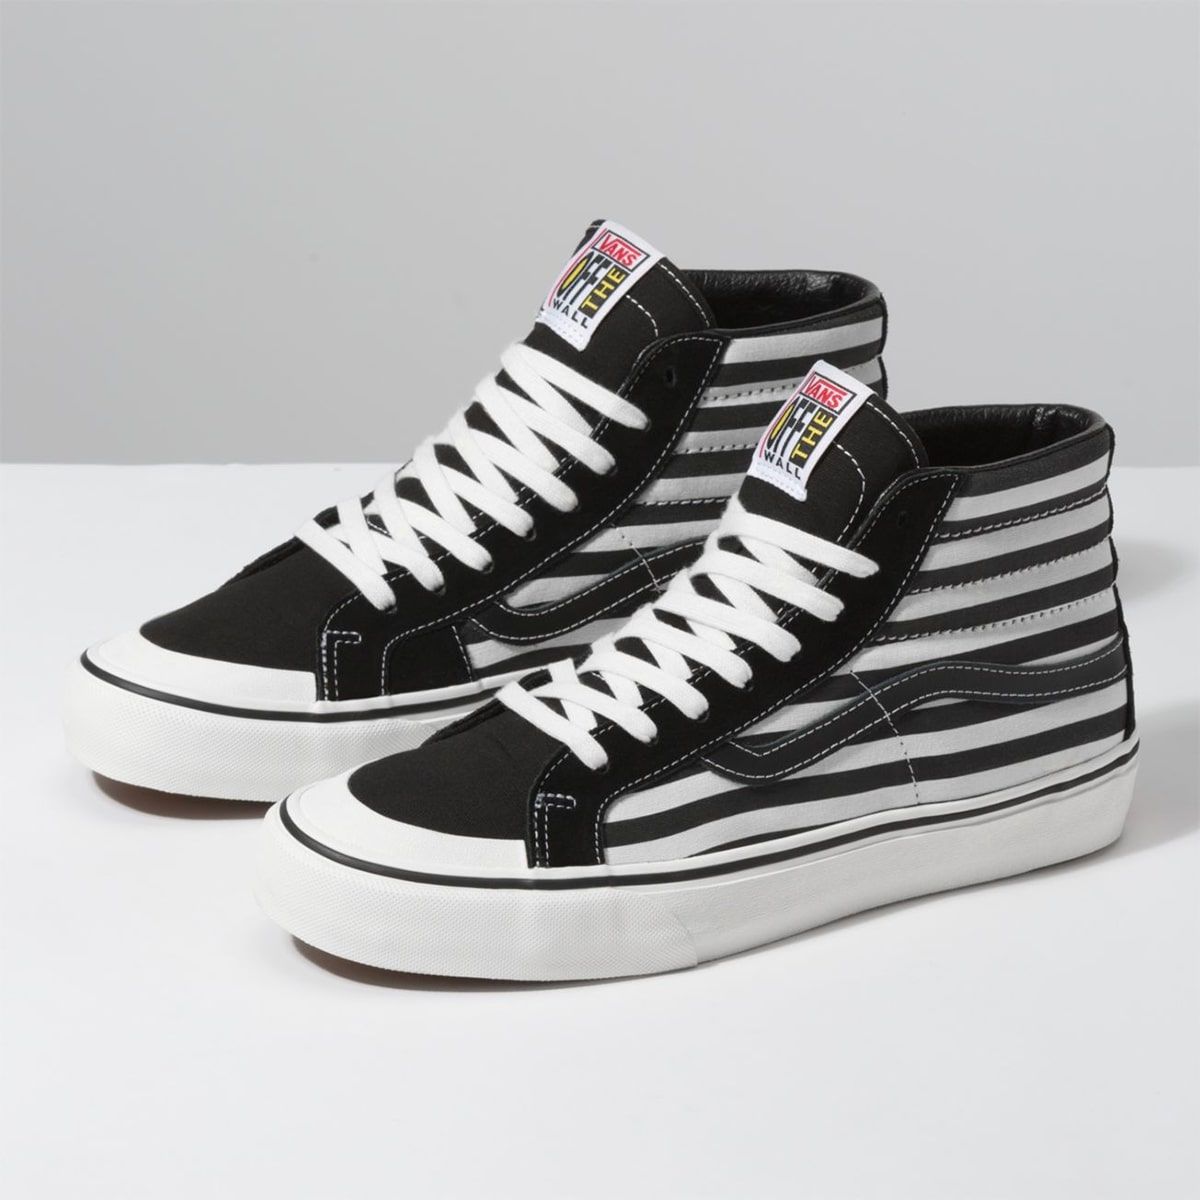 Available Now // Vans Stripe Pack 